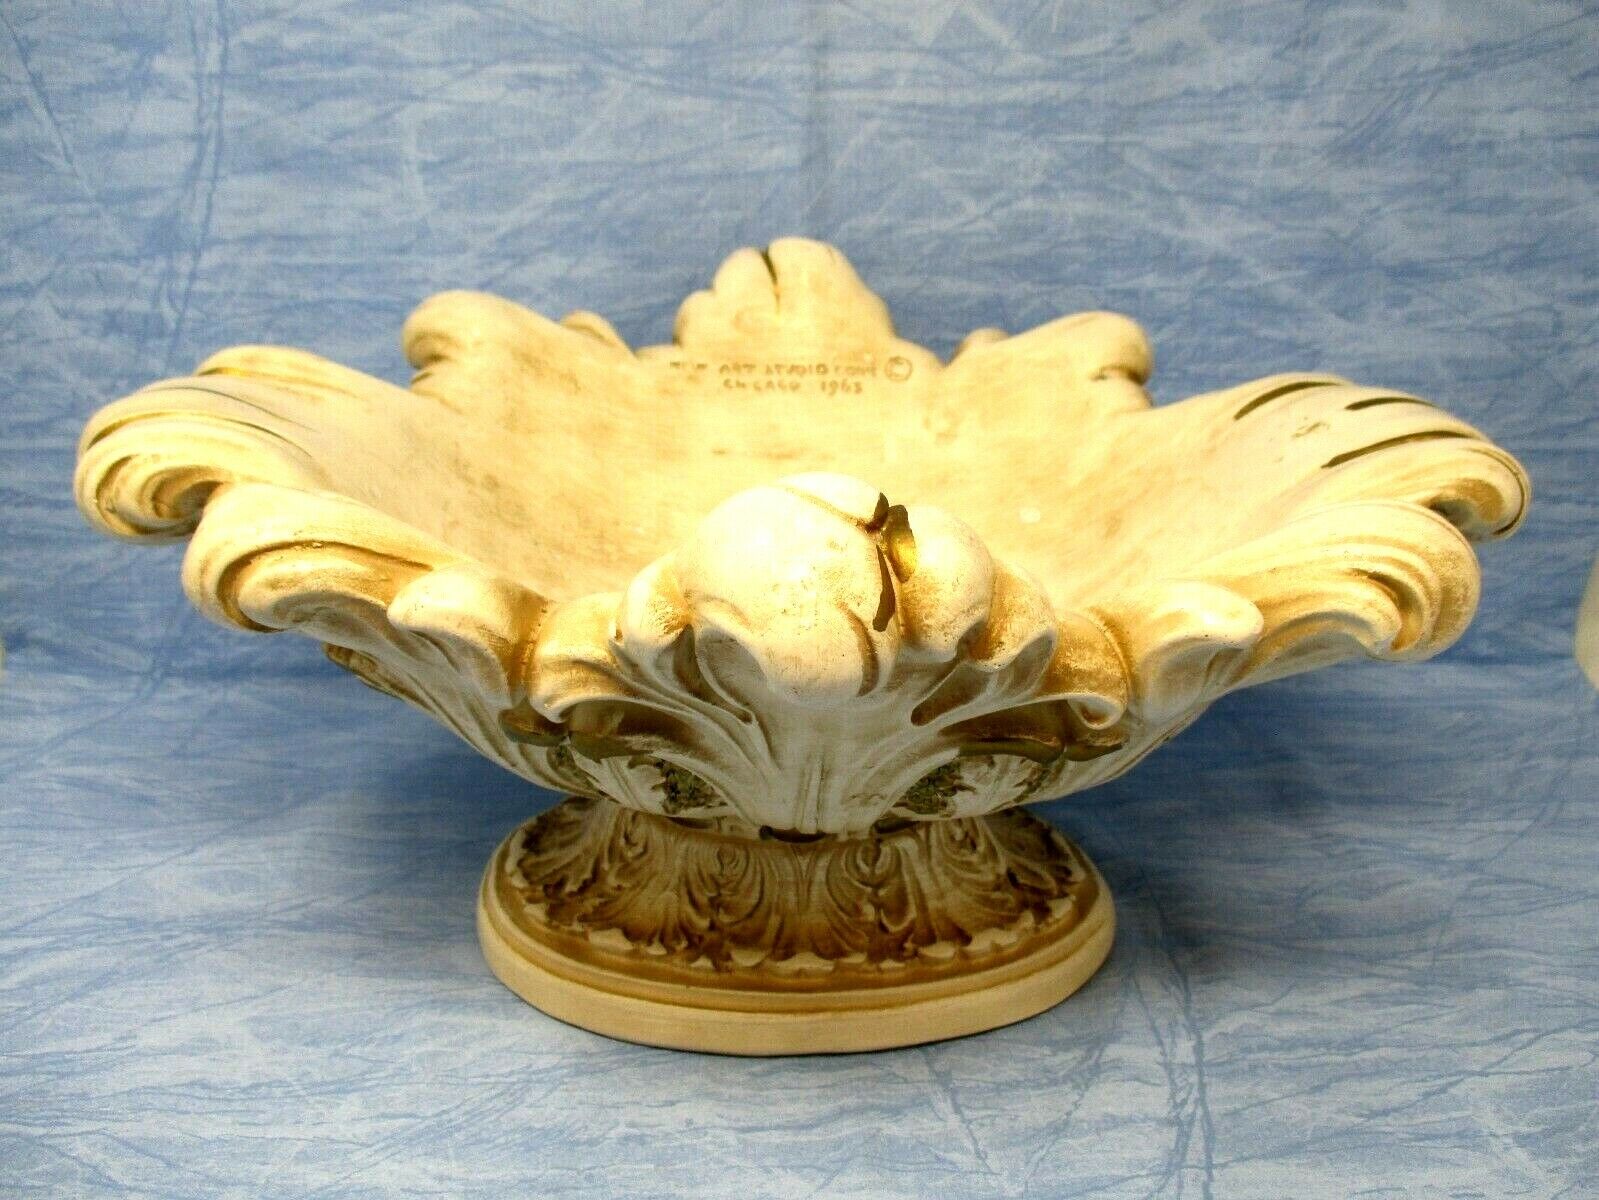 Vintage Chalkware Bowl Centerpiece French country ornate fancy 1963 mid century